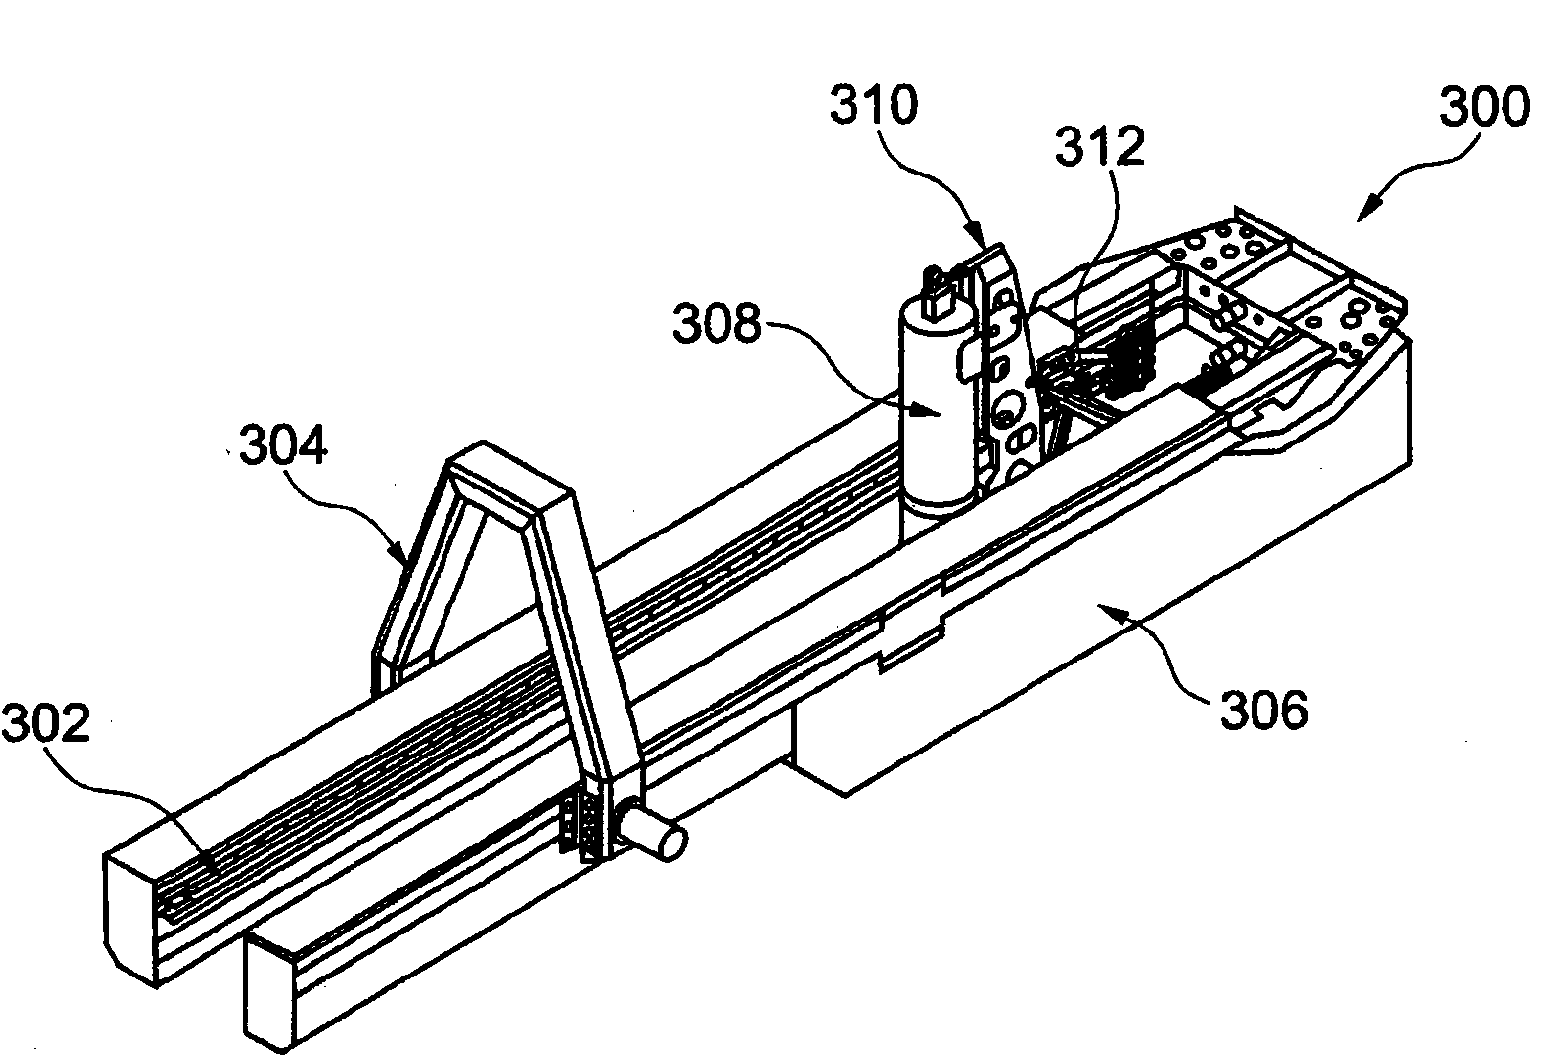 System for investigating collisions between test body and physical structure